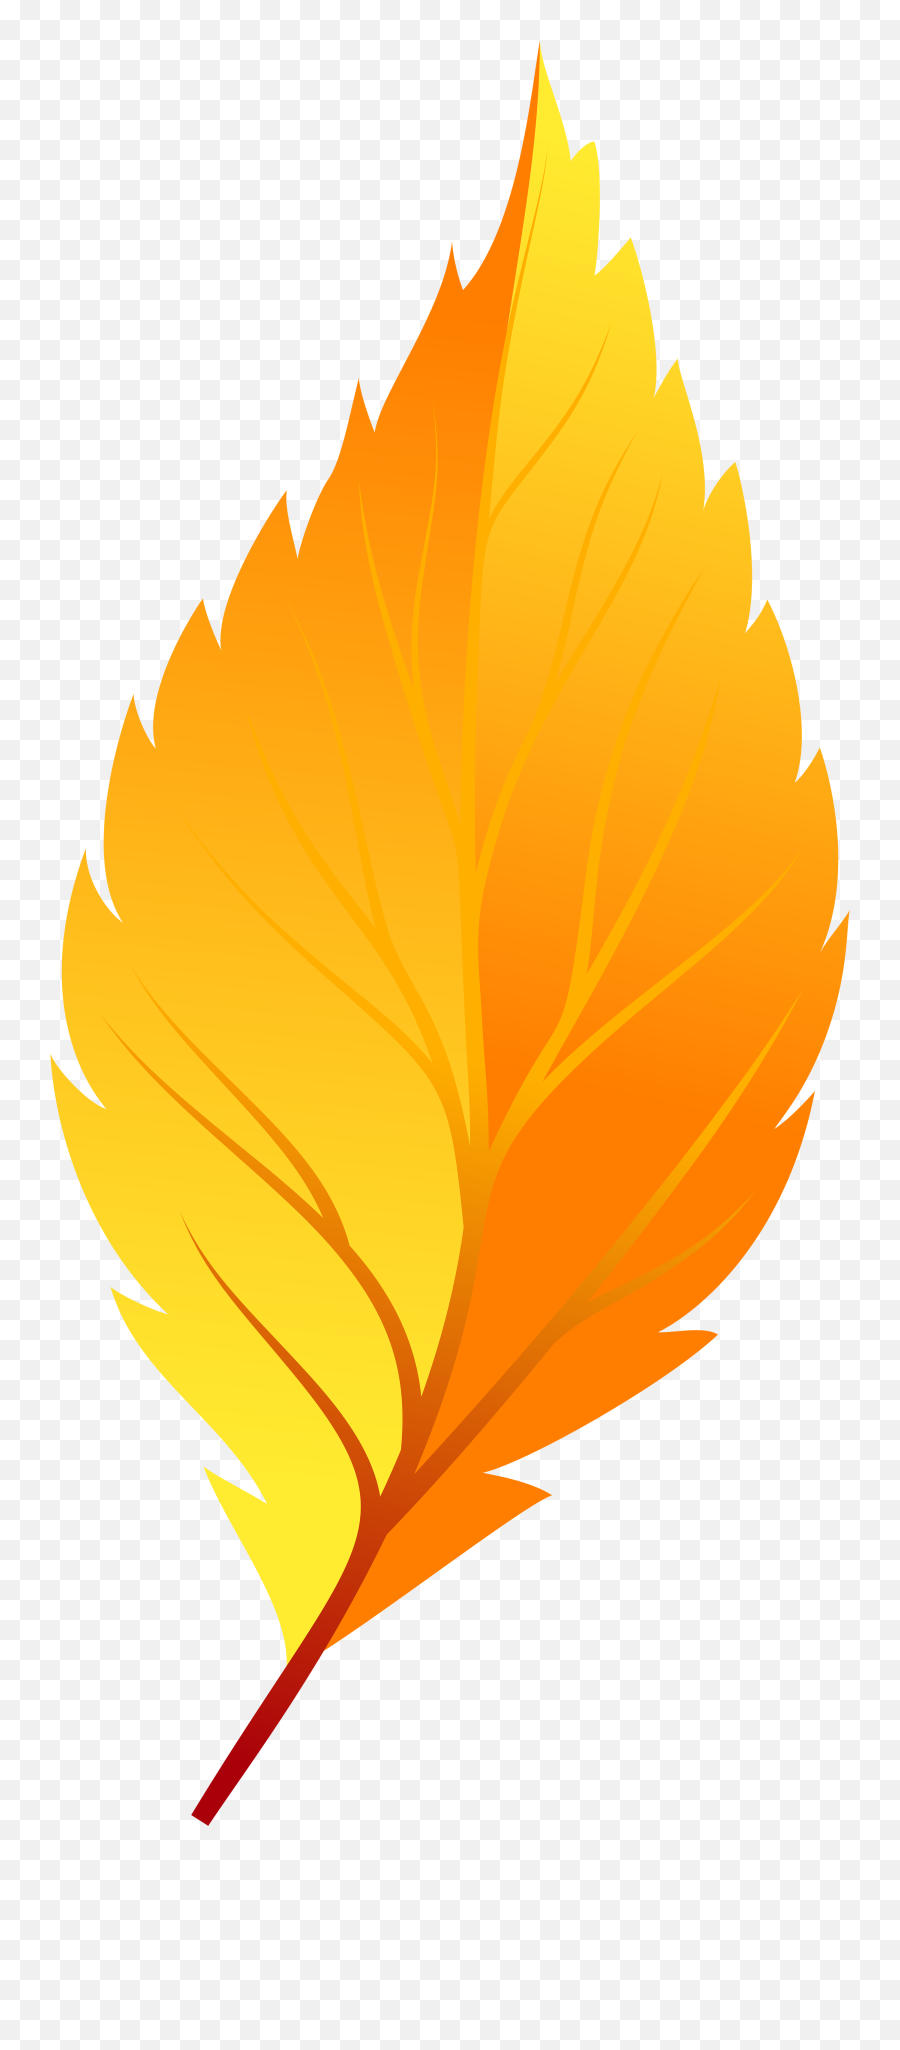 Leaves Clipart Red Fall Leaf Leaves - Yellow Autumn Leaf Clipart Emoji,Fall Leaves Clipart